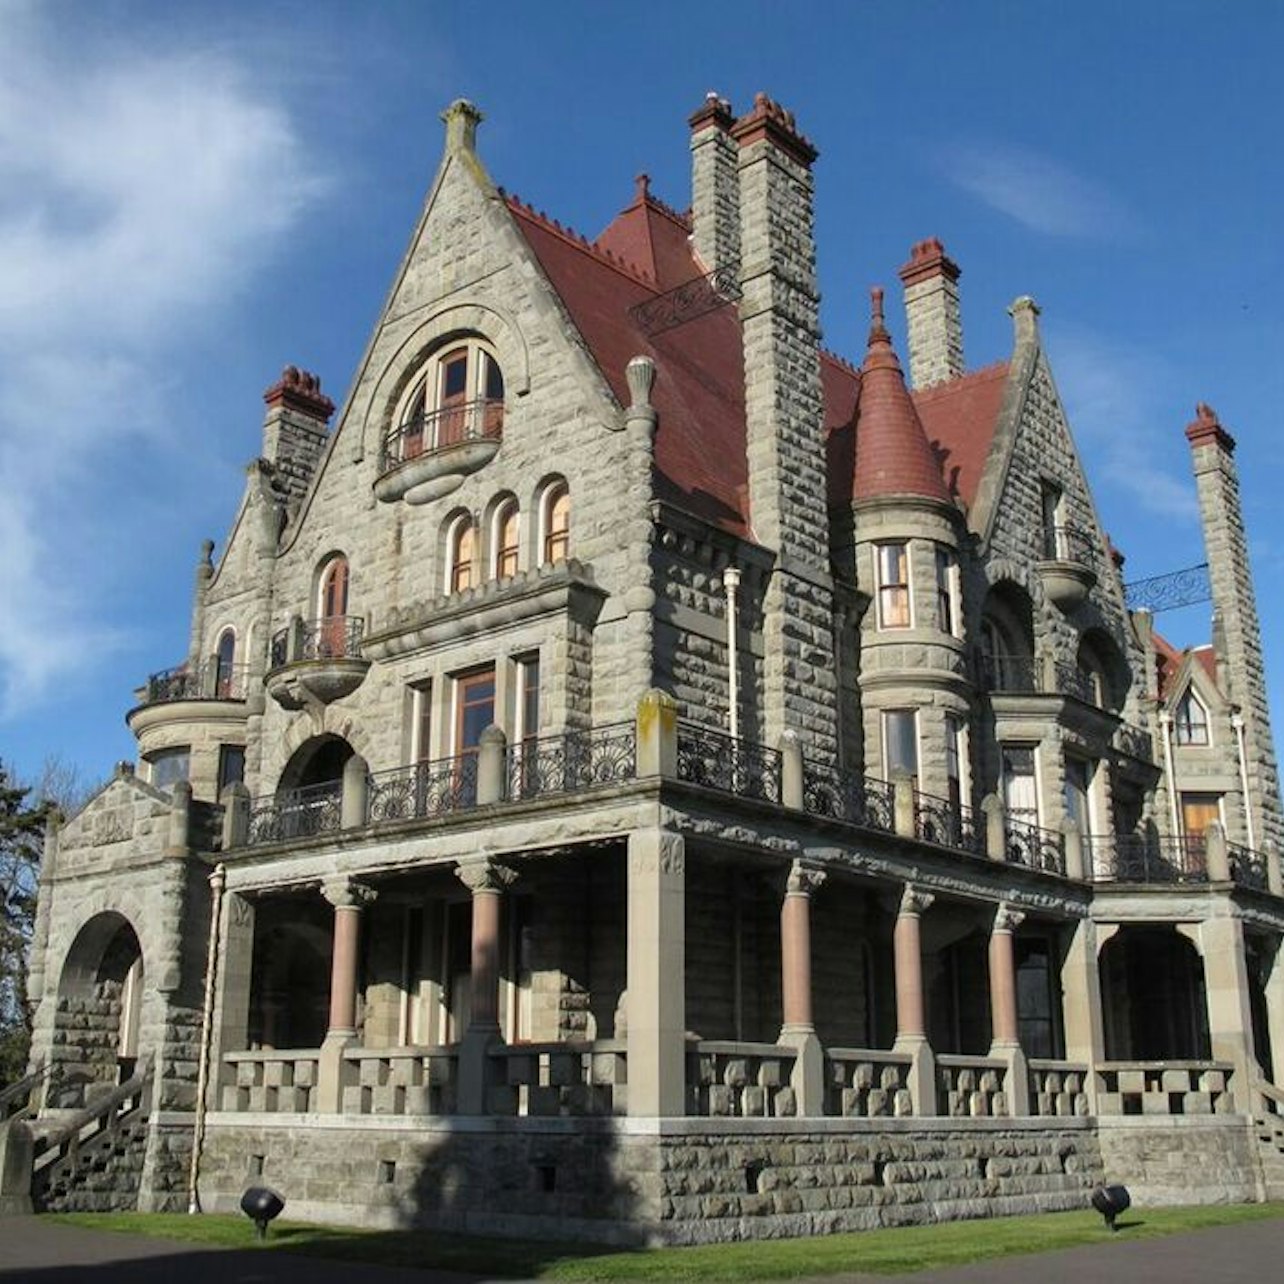 Hop-on Hop-off Bus Victoria + Craigdarroch Castle - Accommodations in Victoria